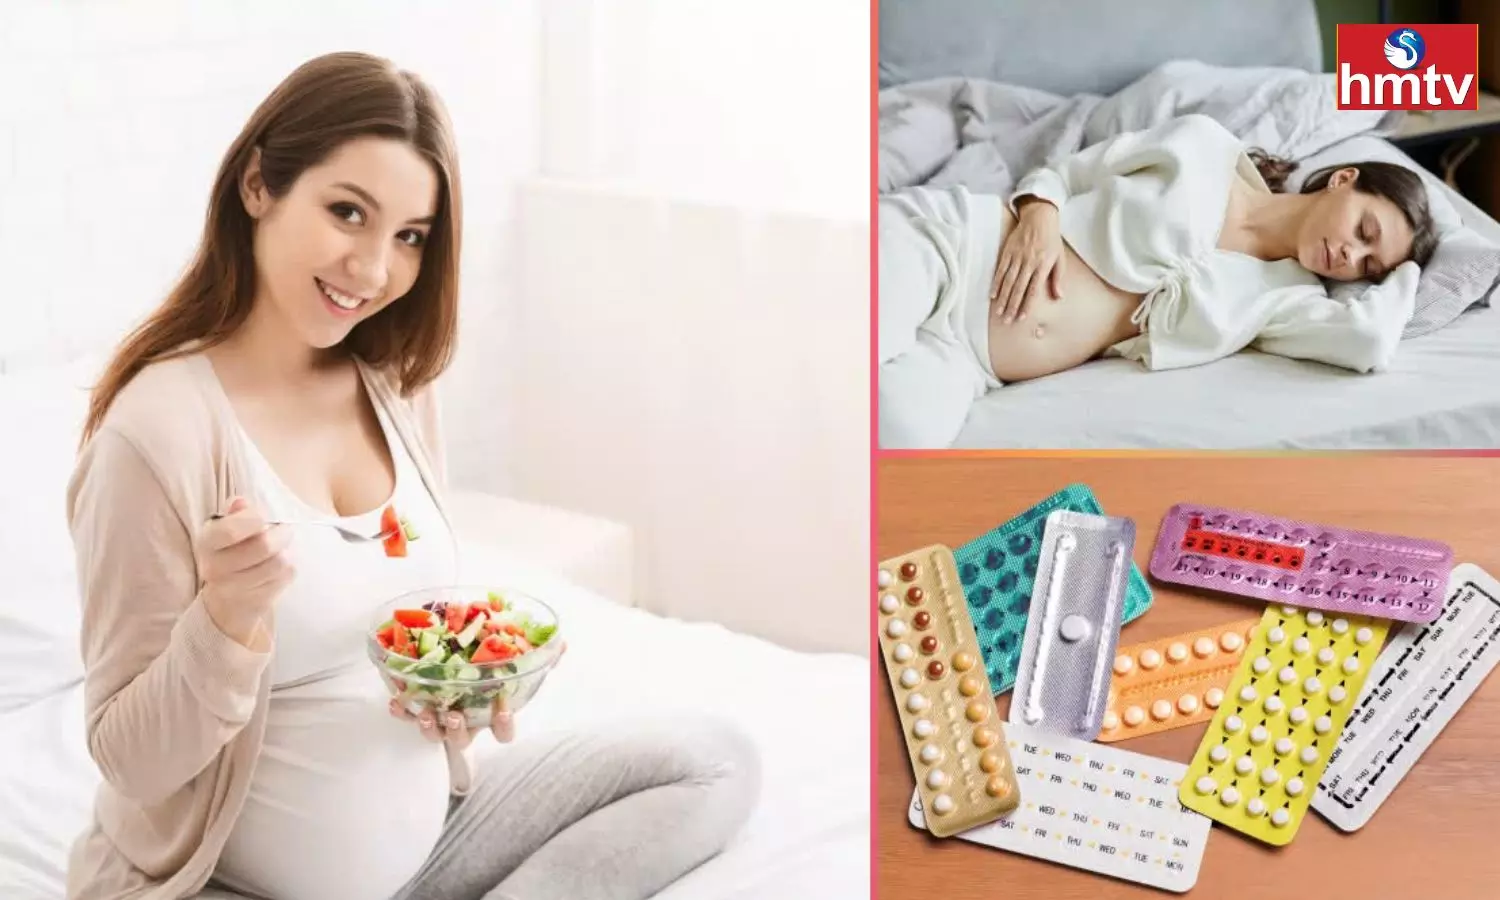 Are You Using Contraceptive Pills Excessively The Risk Of These Diseases Is Lurking